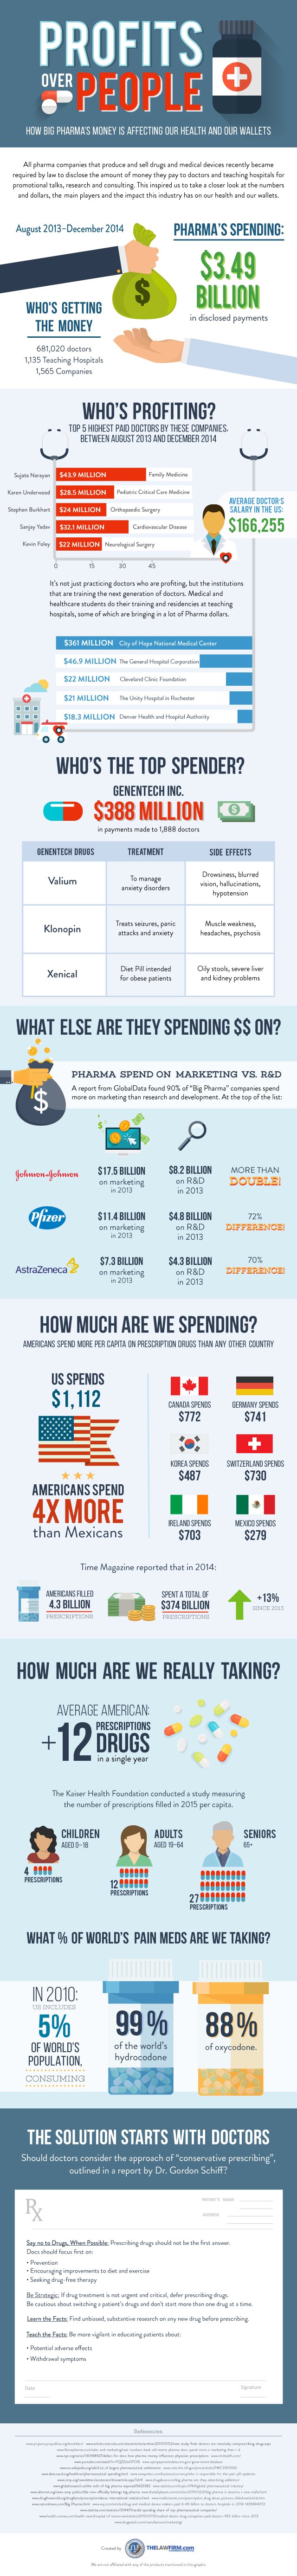 infographic showing how big pharma chooses profits over people